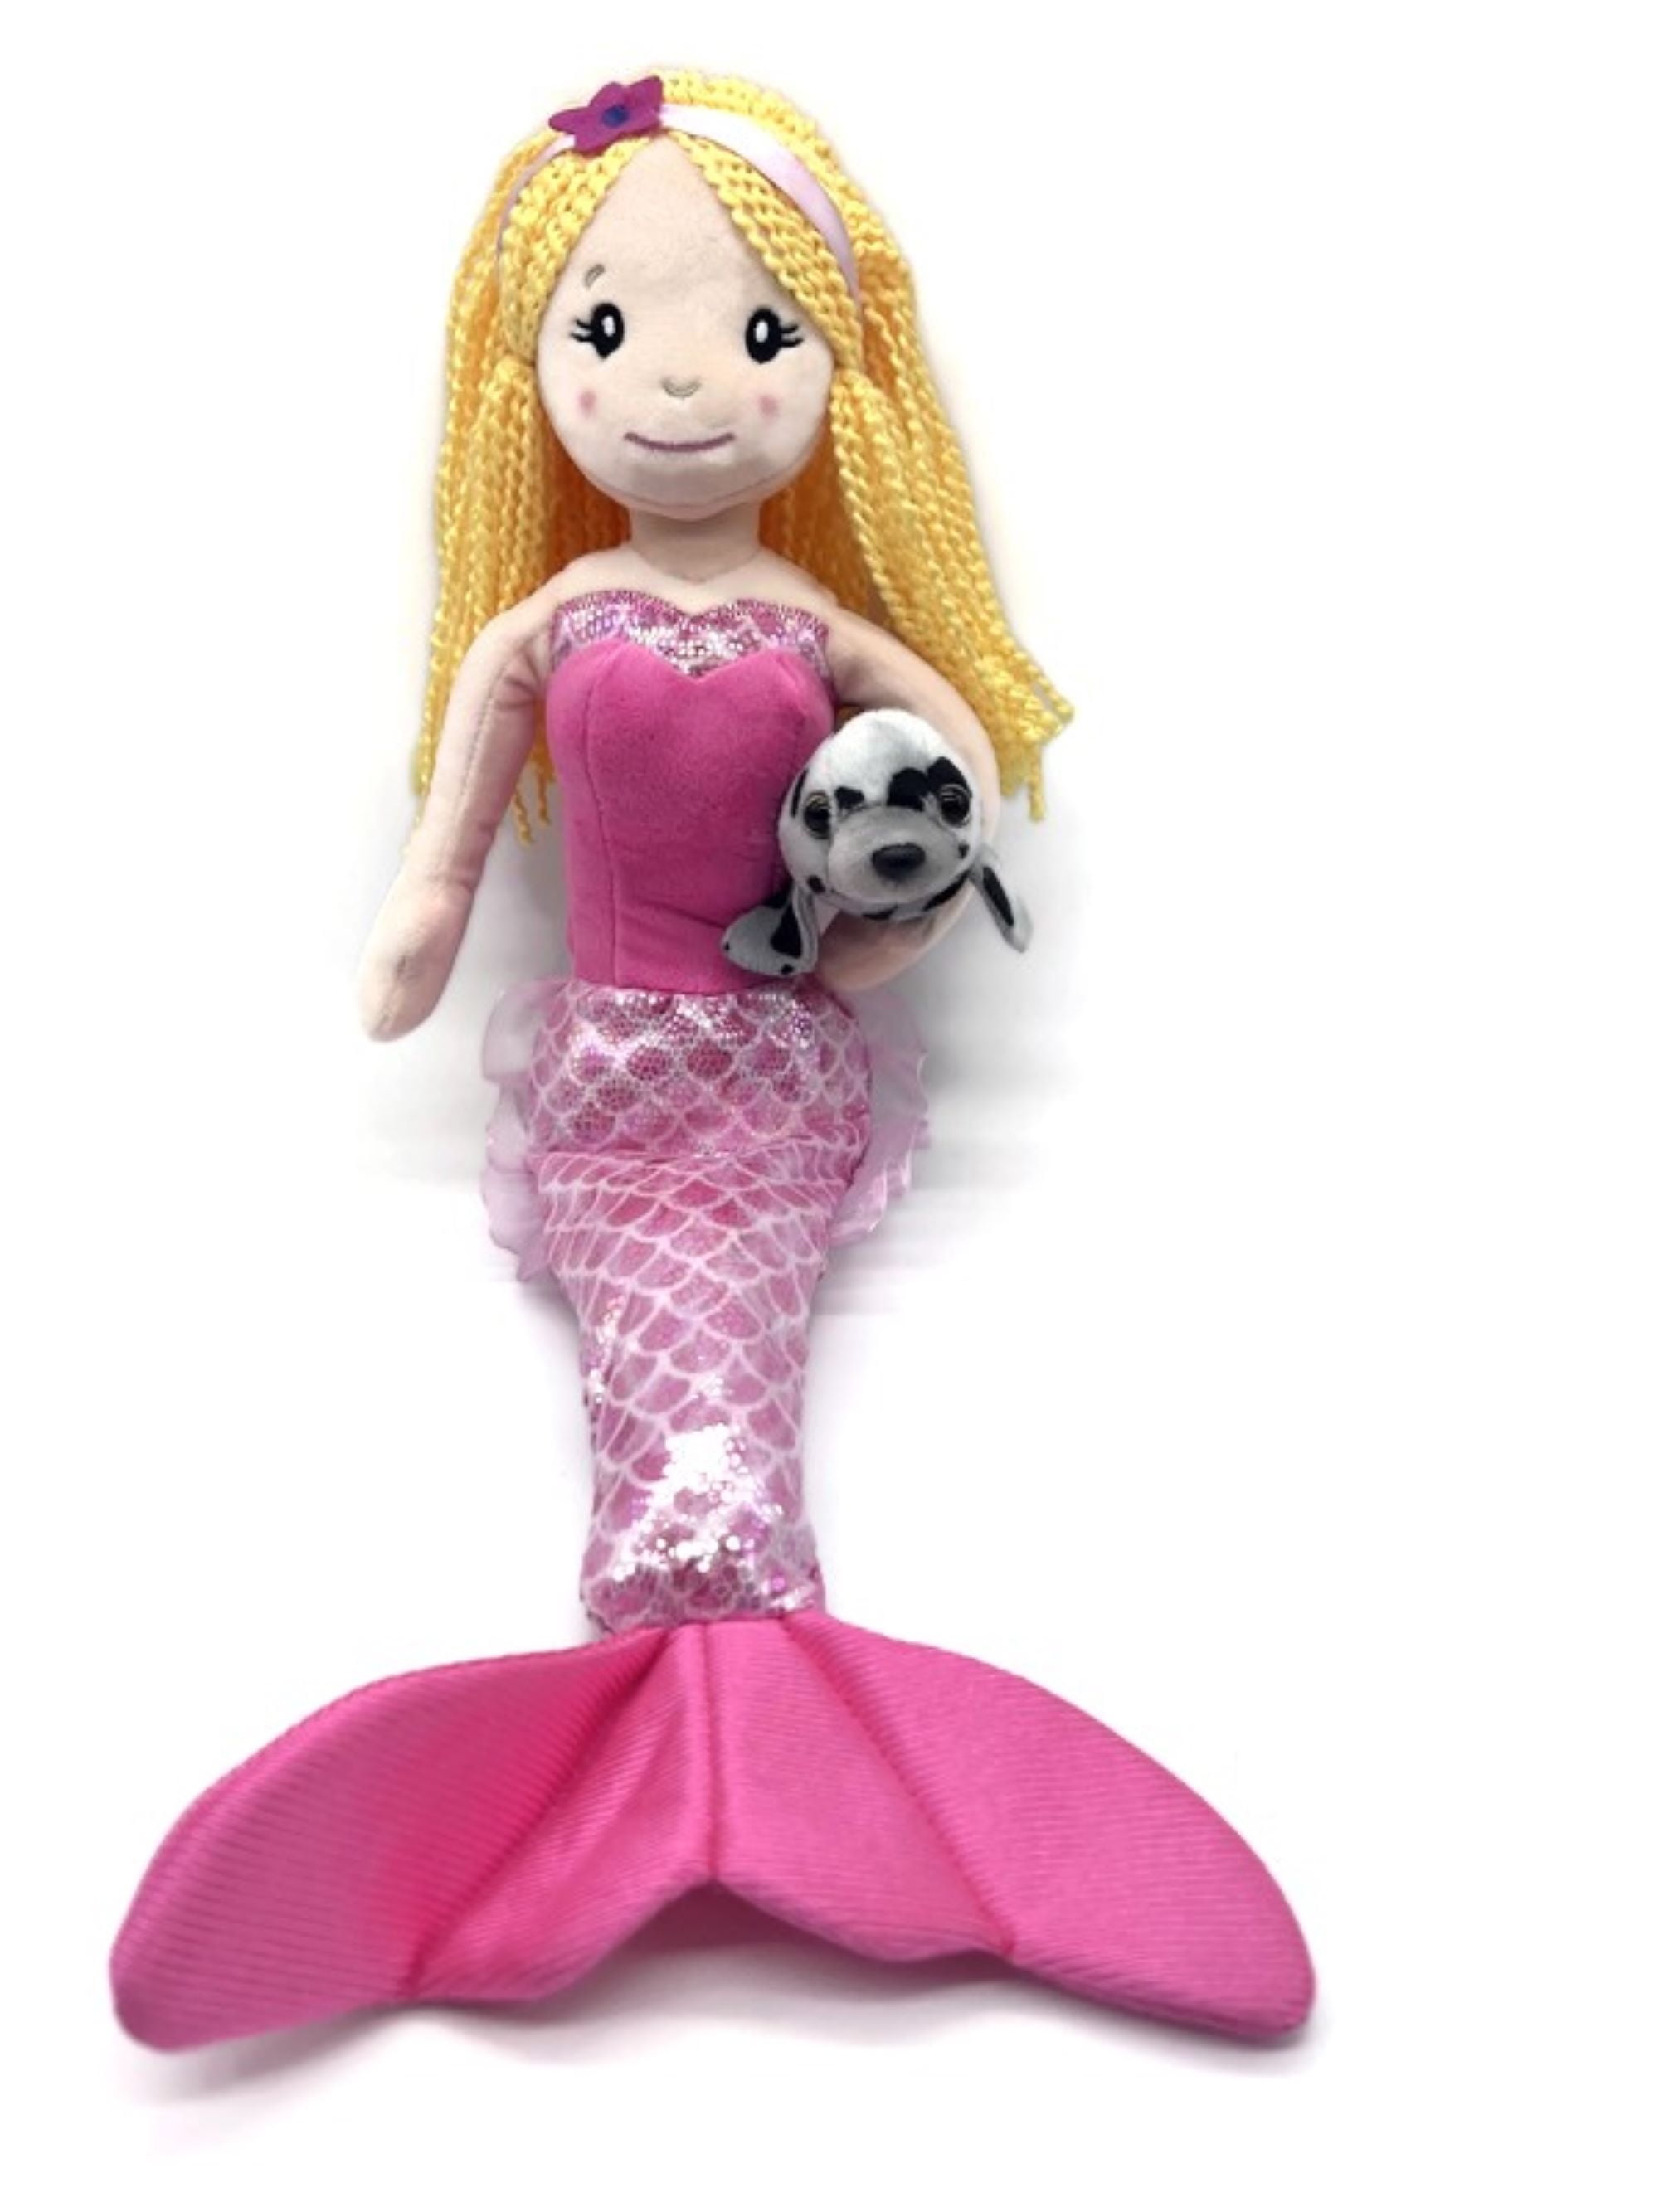 Mermaid Doll, Mermaid Gifts for Girls, Plush Rag Doll in a Variety of  Nautical Prints, 18 inch (Lobster, Blonde) 